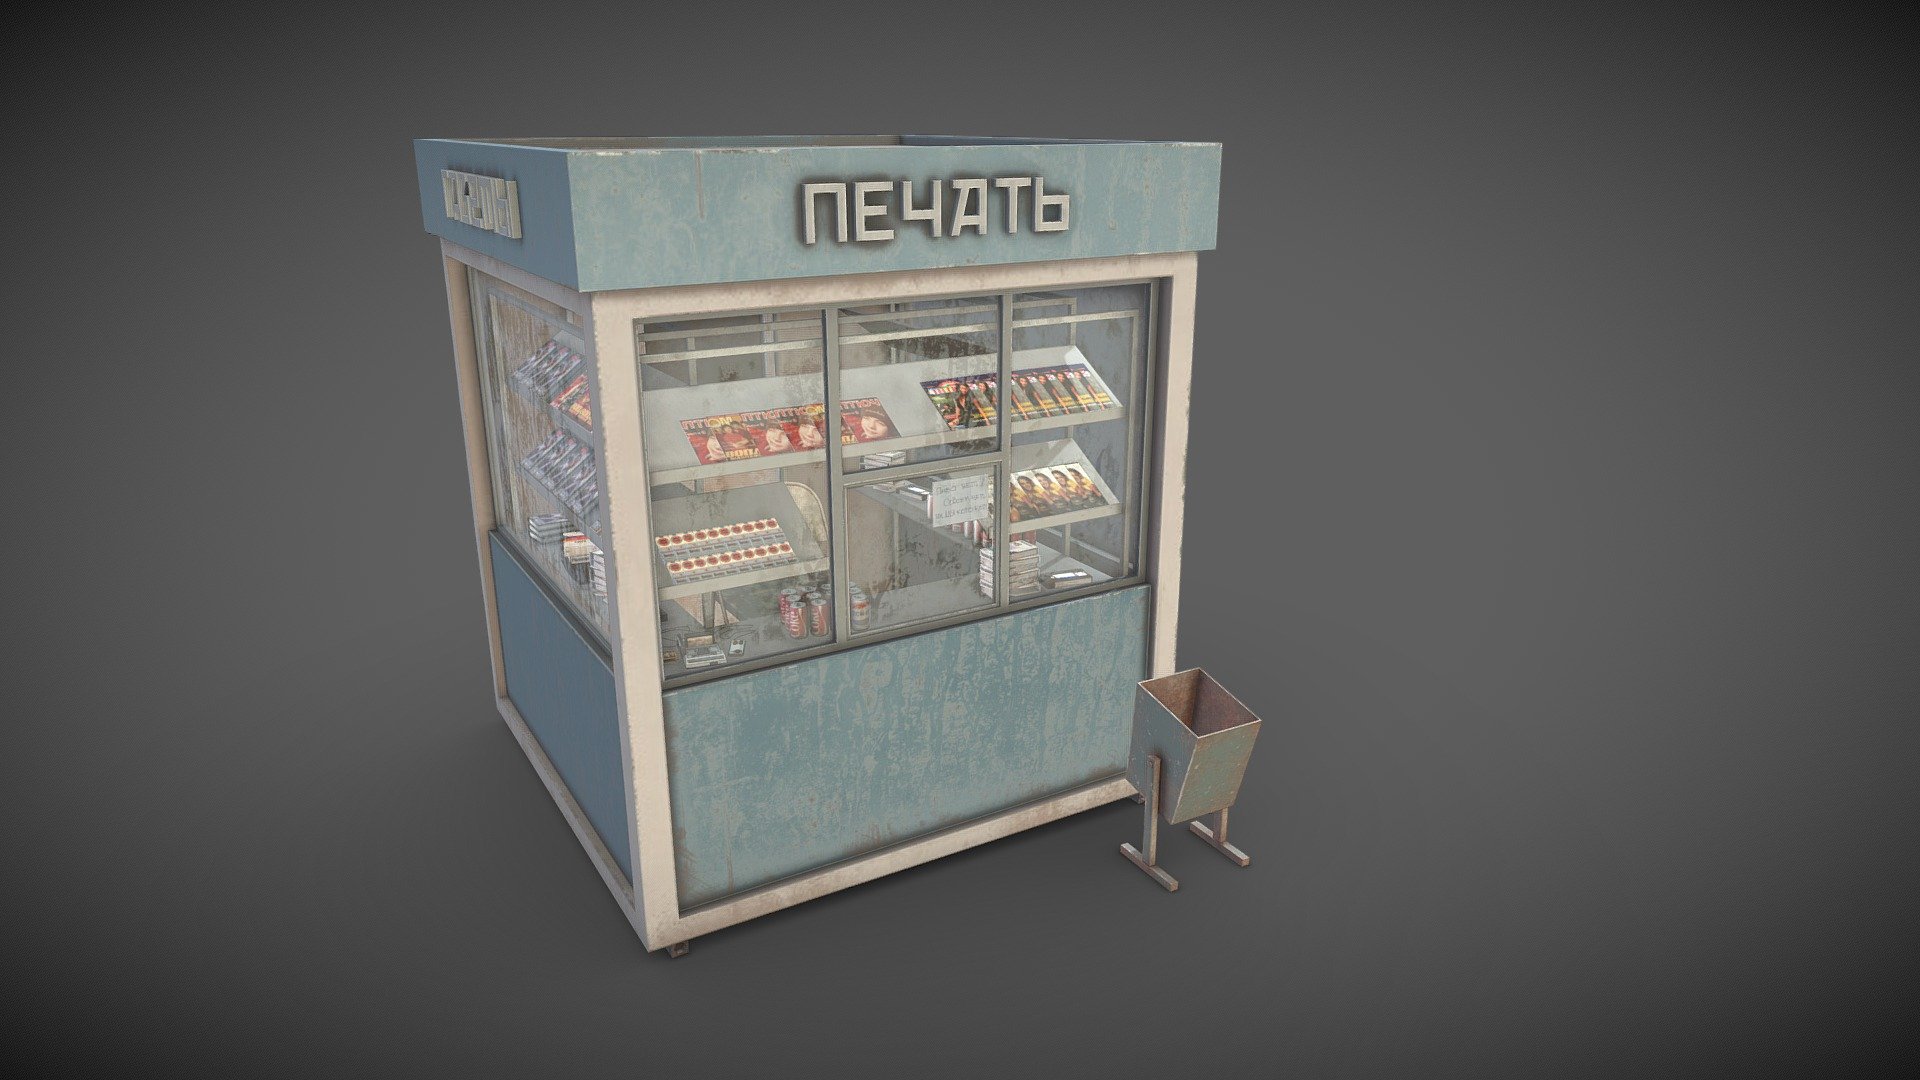 Kiosk store widely used in post-USSR cities in the 1990's.
Project for Second Life metaverse.
All parts unwrapped and baked 3d model